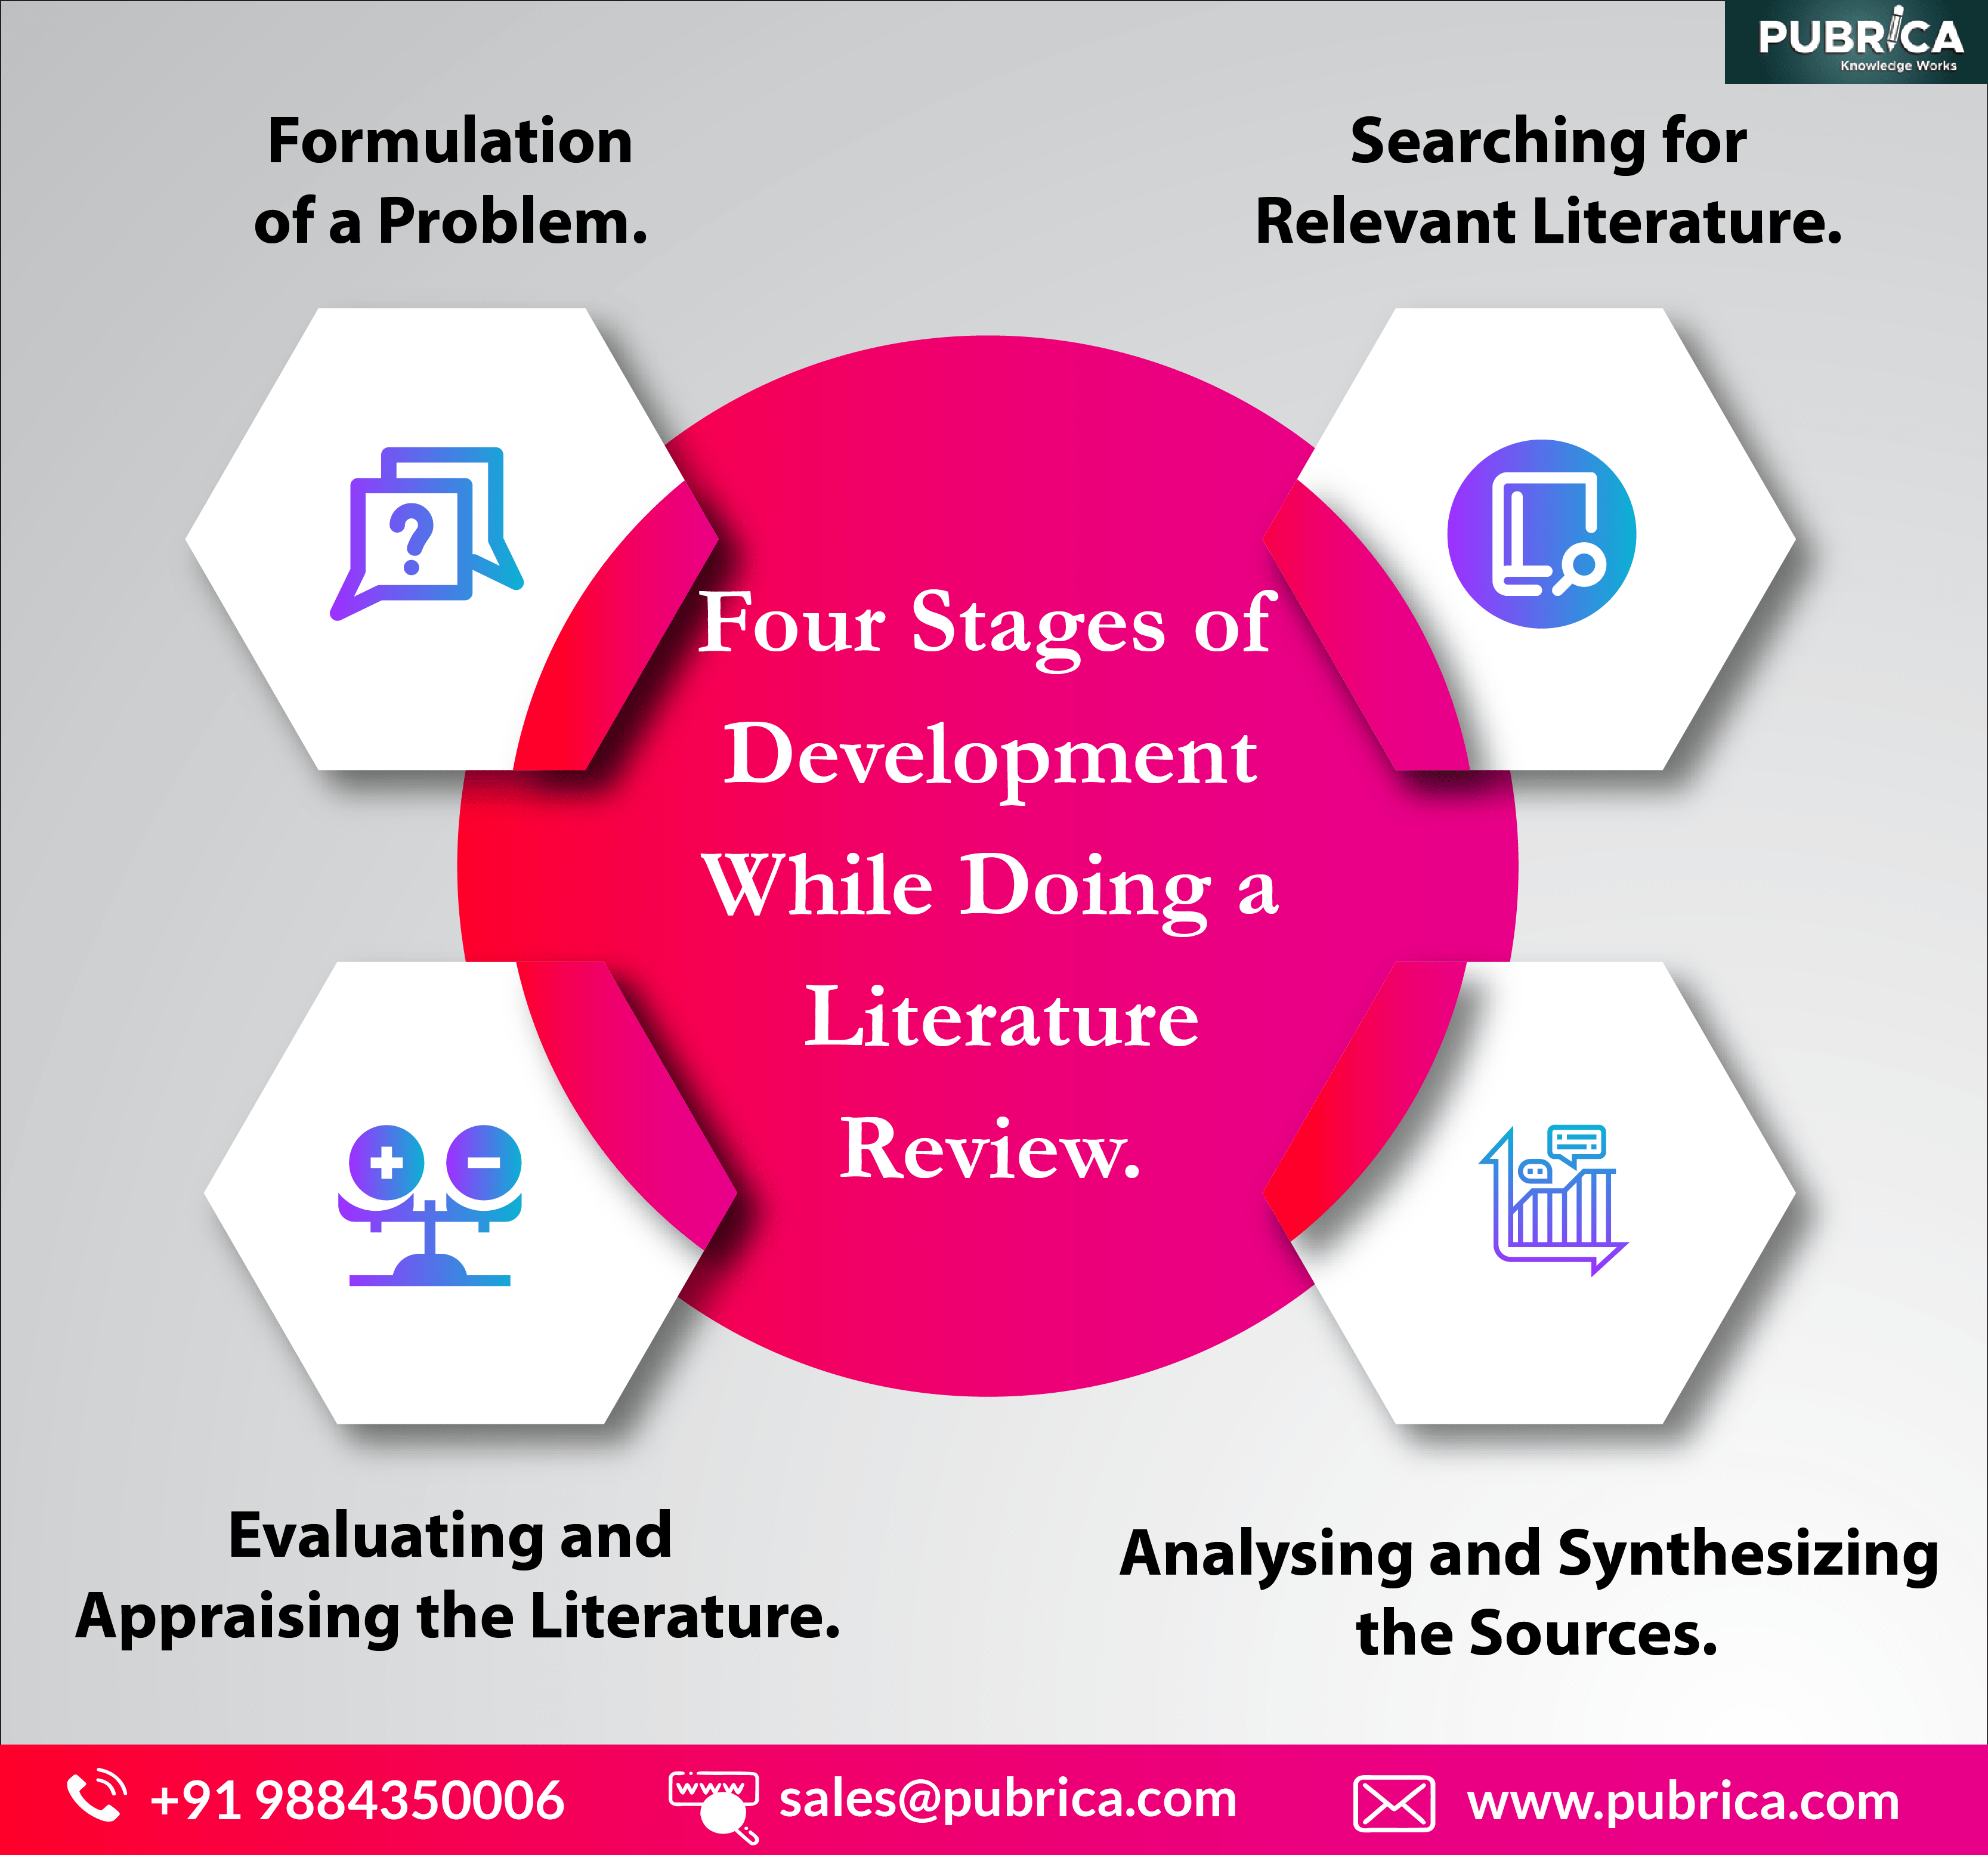 the primary purpose for reviewing relevant literature in research